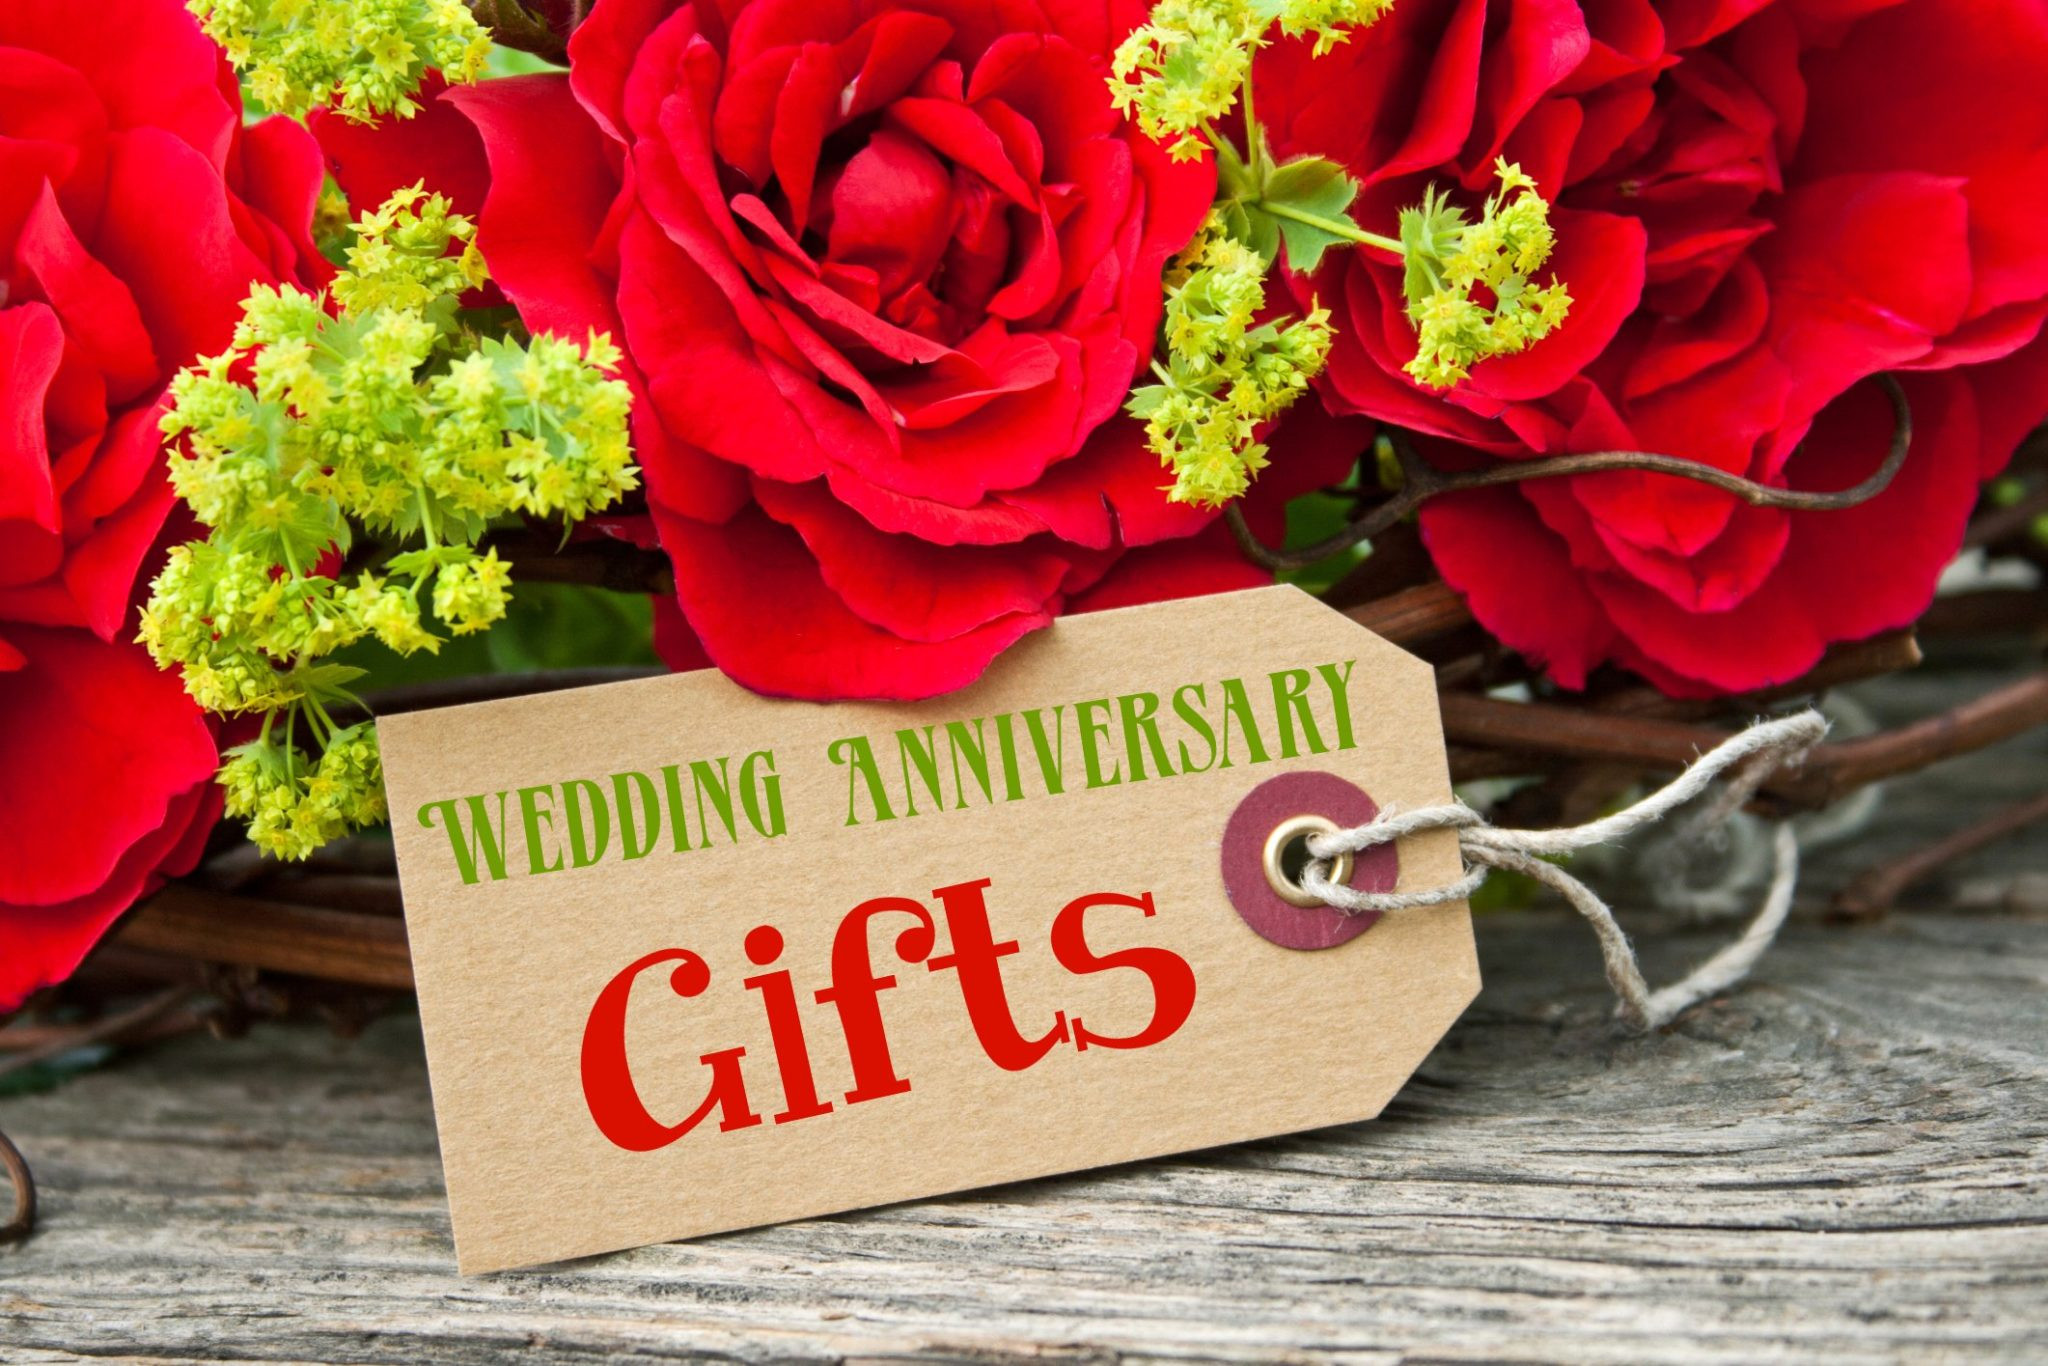 Wedding Anniversary Gift
 Finding The Best 7th Year Wedding Anniversary Gifts The